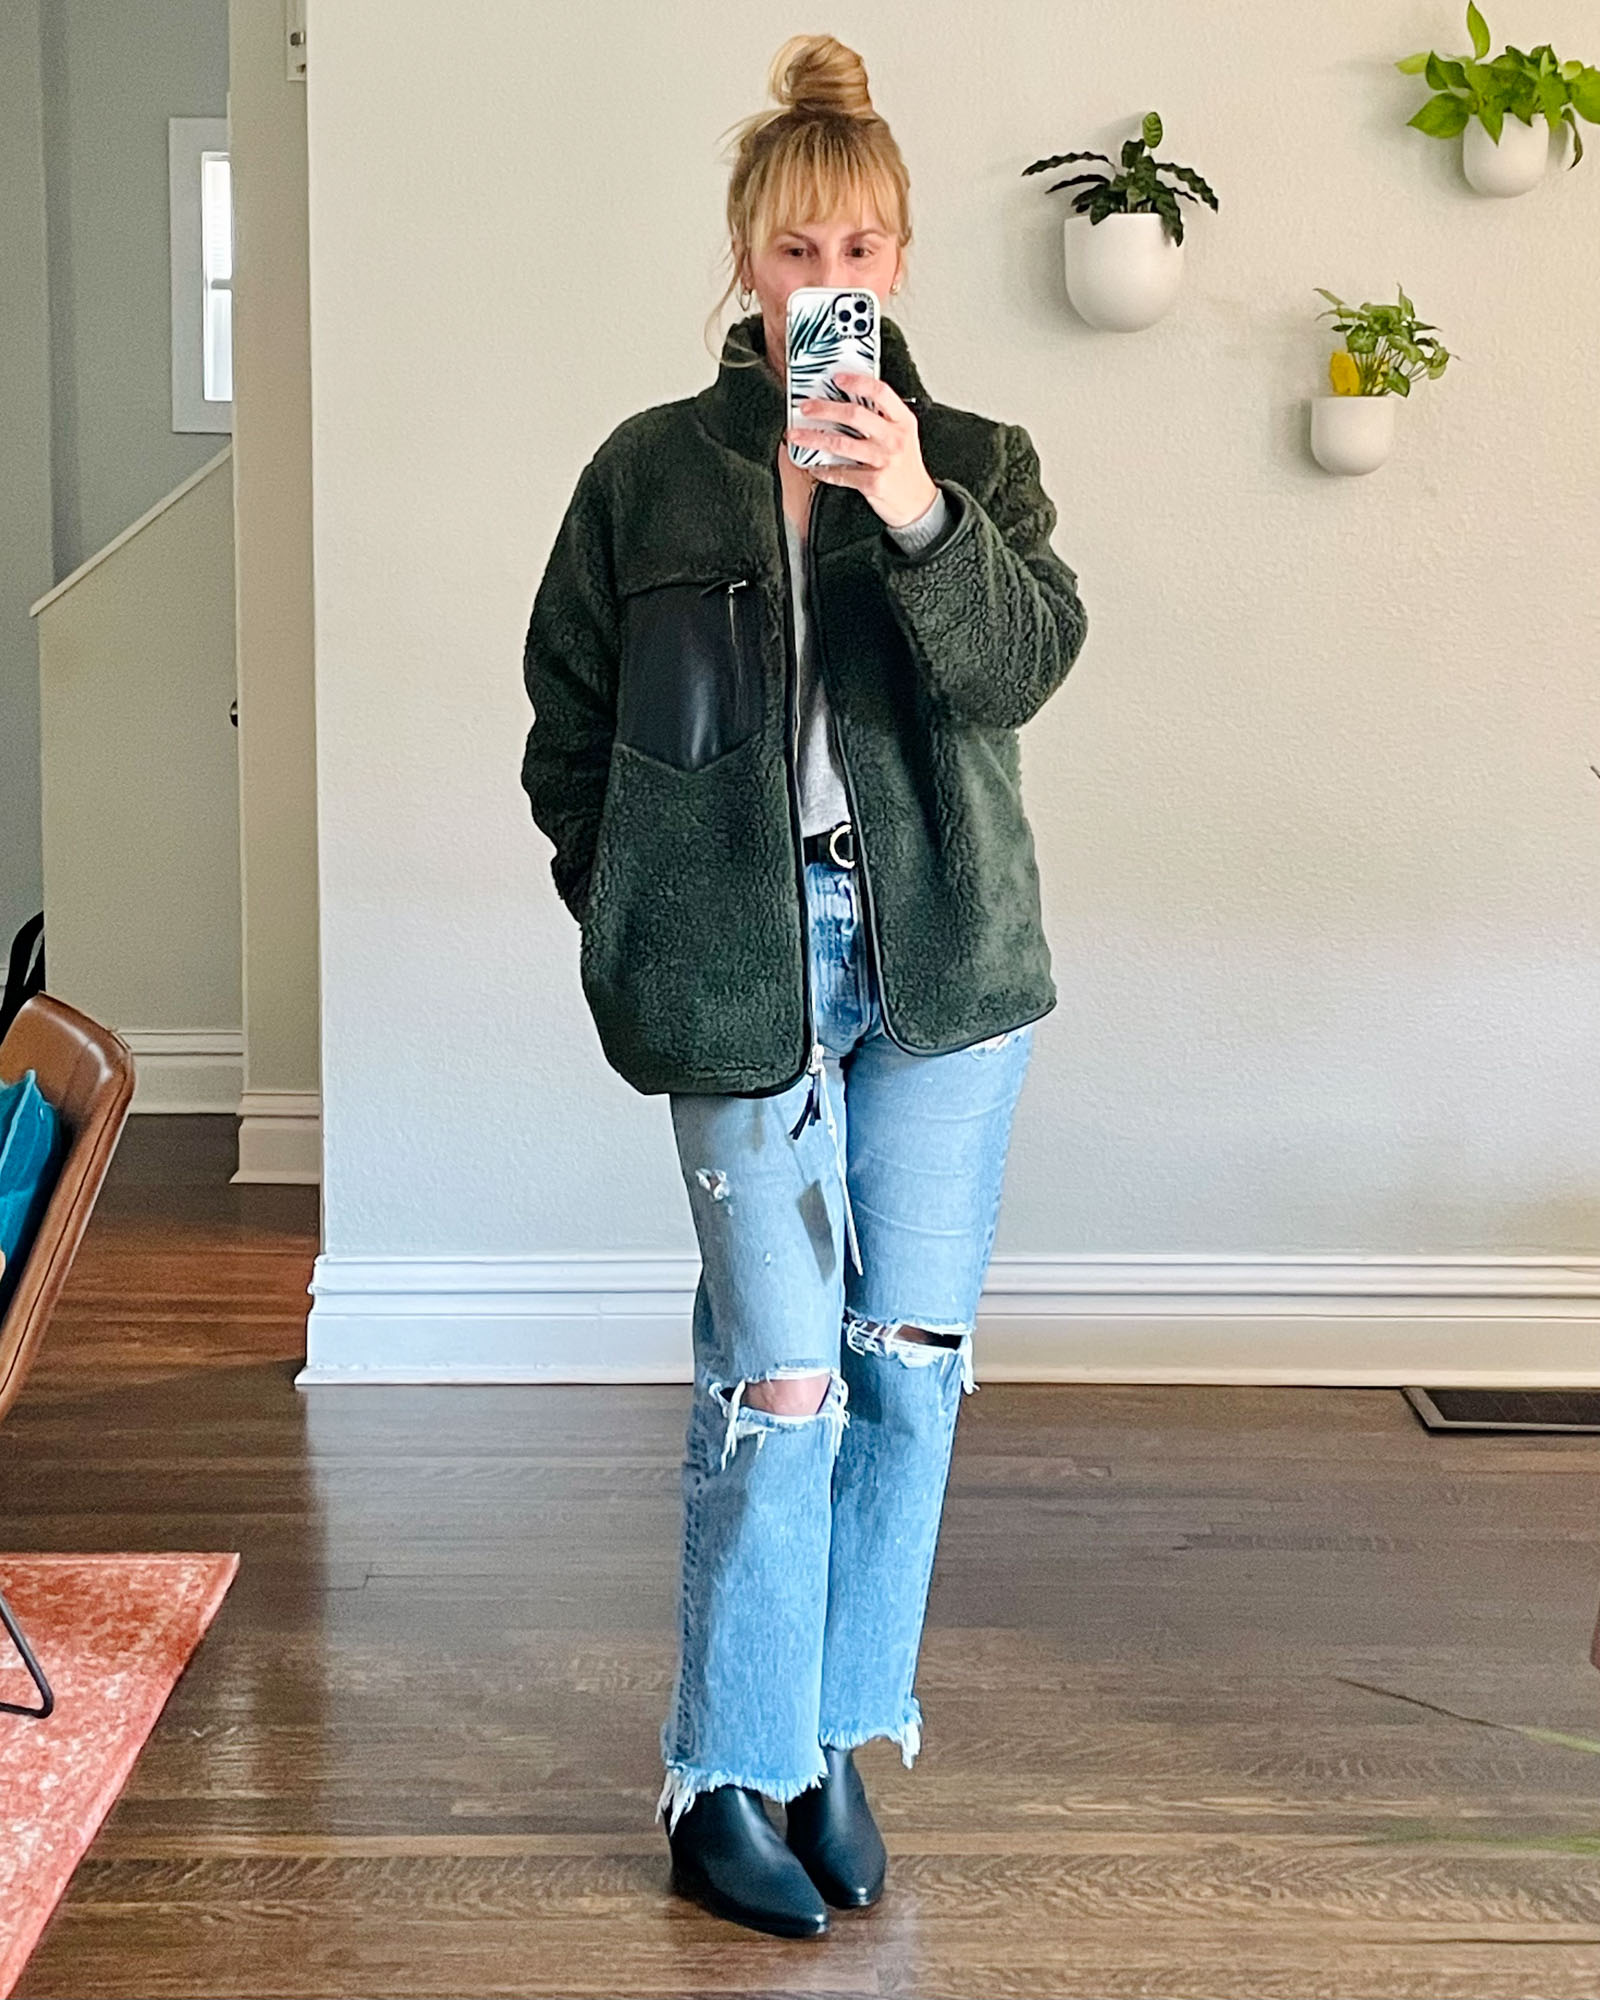 Wearing the Anine Bing Ryder jacket in olive with Moussy jeans and black Frame Lexington booties.